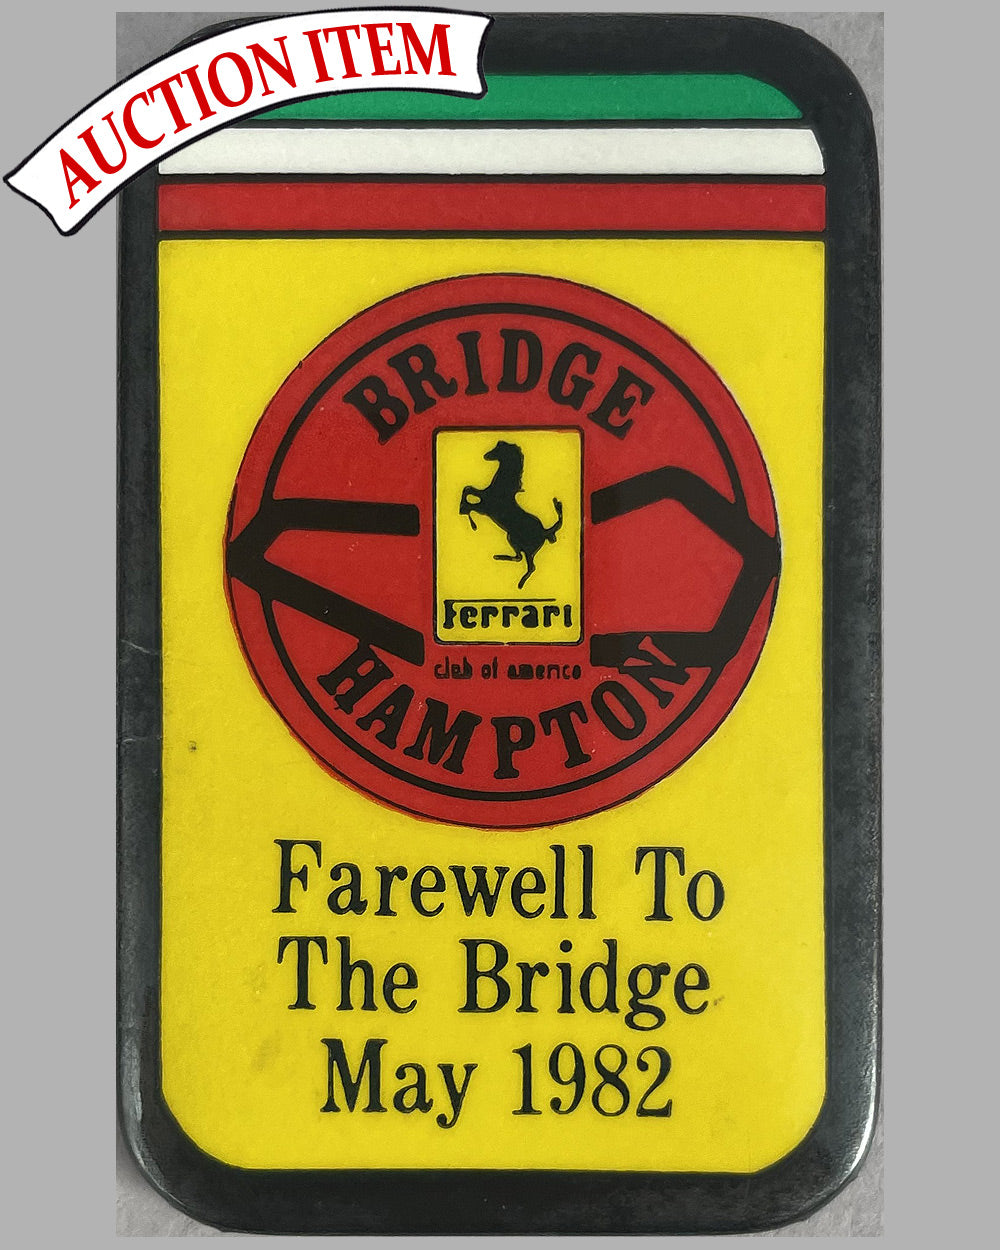 Farewell to the Bridge, May 1982 button